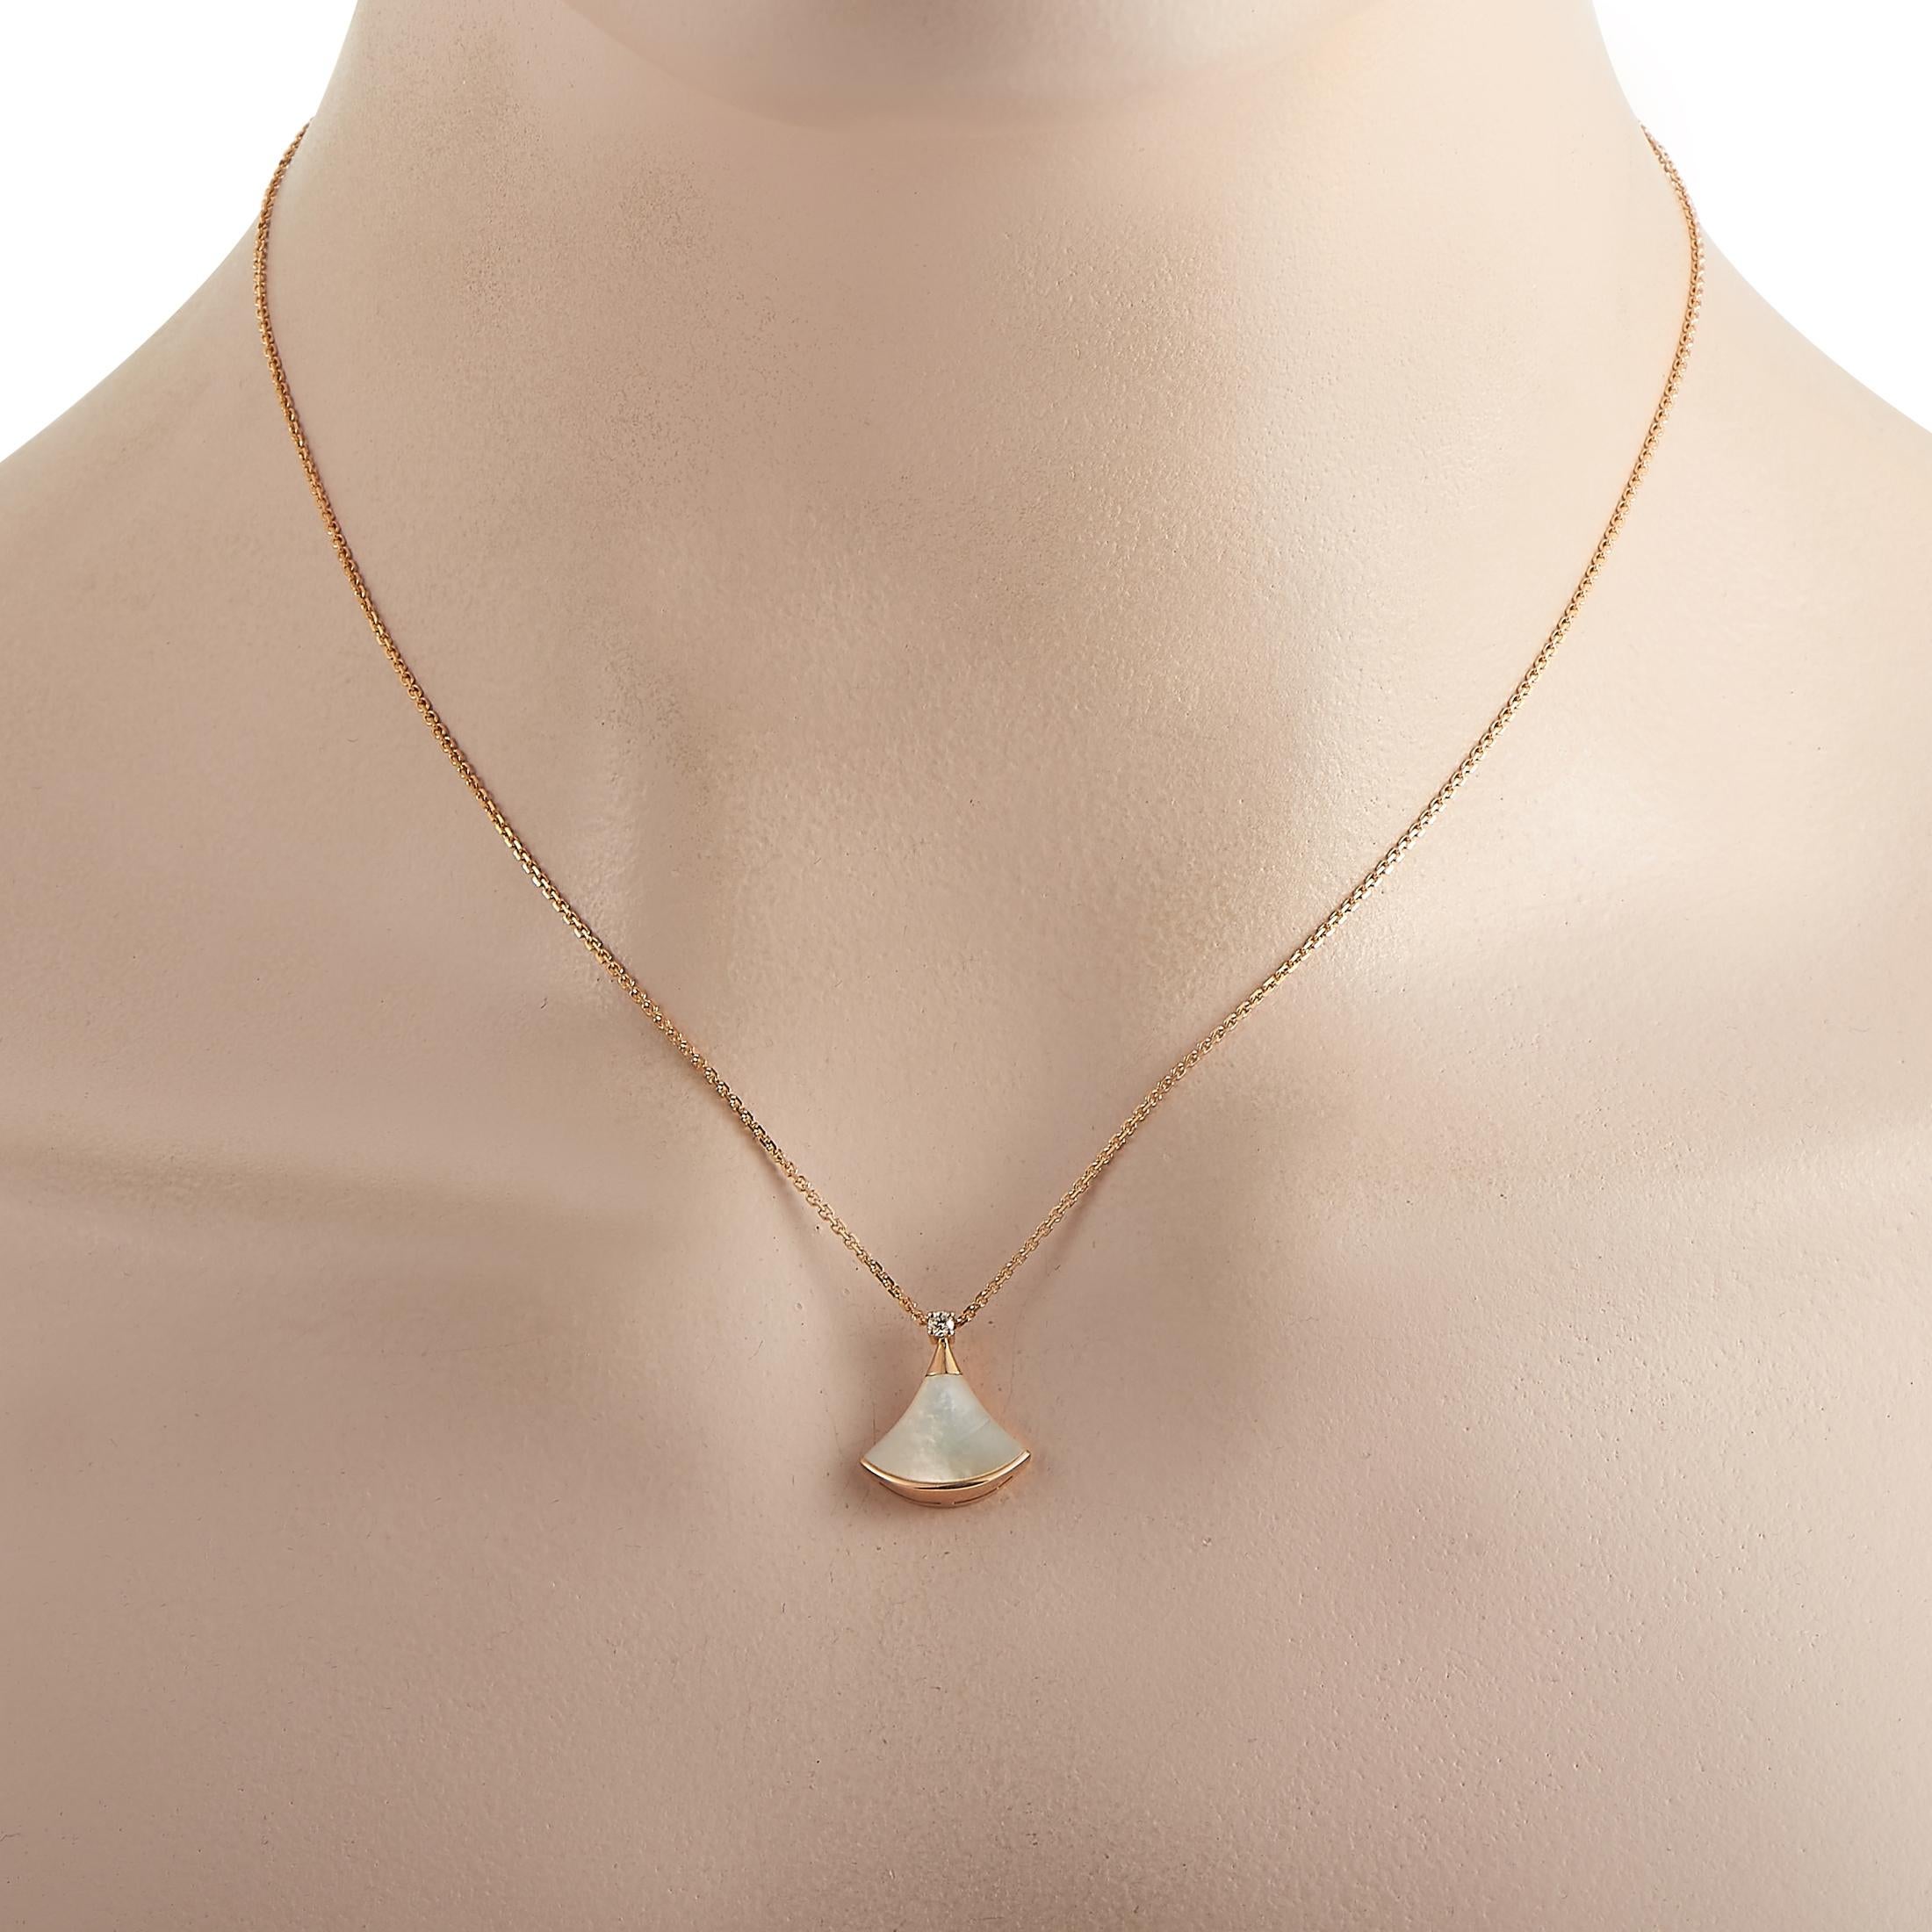 A part of the Divas Dream collection, this pendant necklace from luxury brand Bvlgari is an exquisite piece that will continually capture your imagination. Suspended from a 17” chain, you’ll find a simple fan-shaped Mother of Pearl and 18K Rose Gold